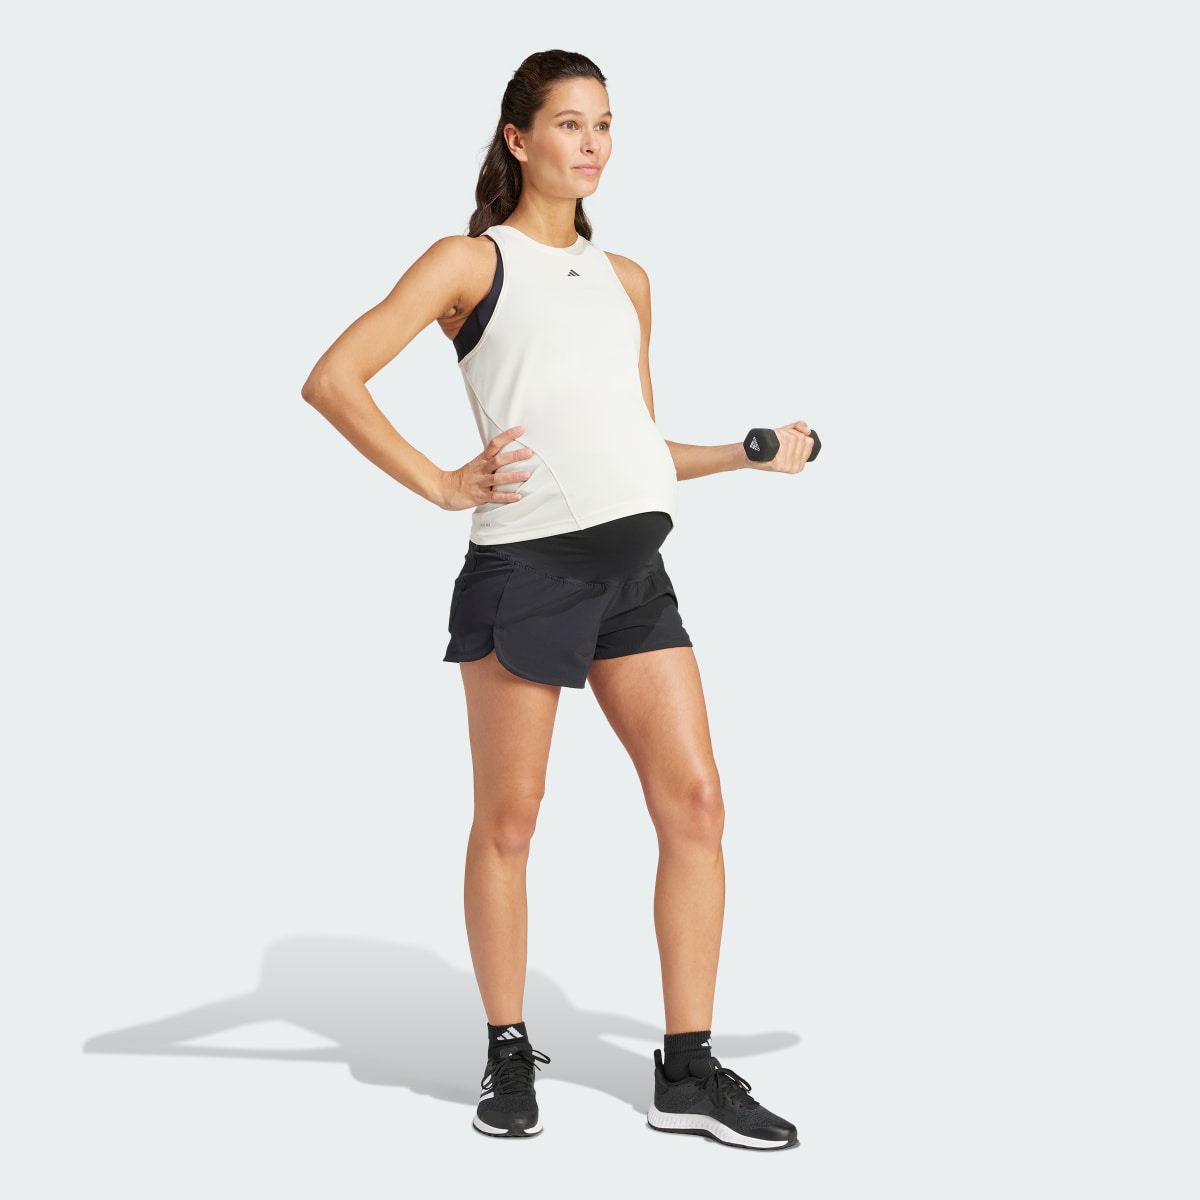 Adidas Pacer Woven Stretch Training Maternity Shorts. 4